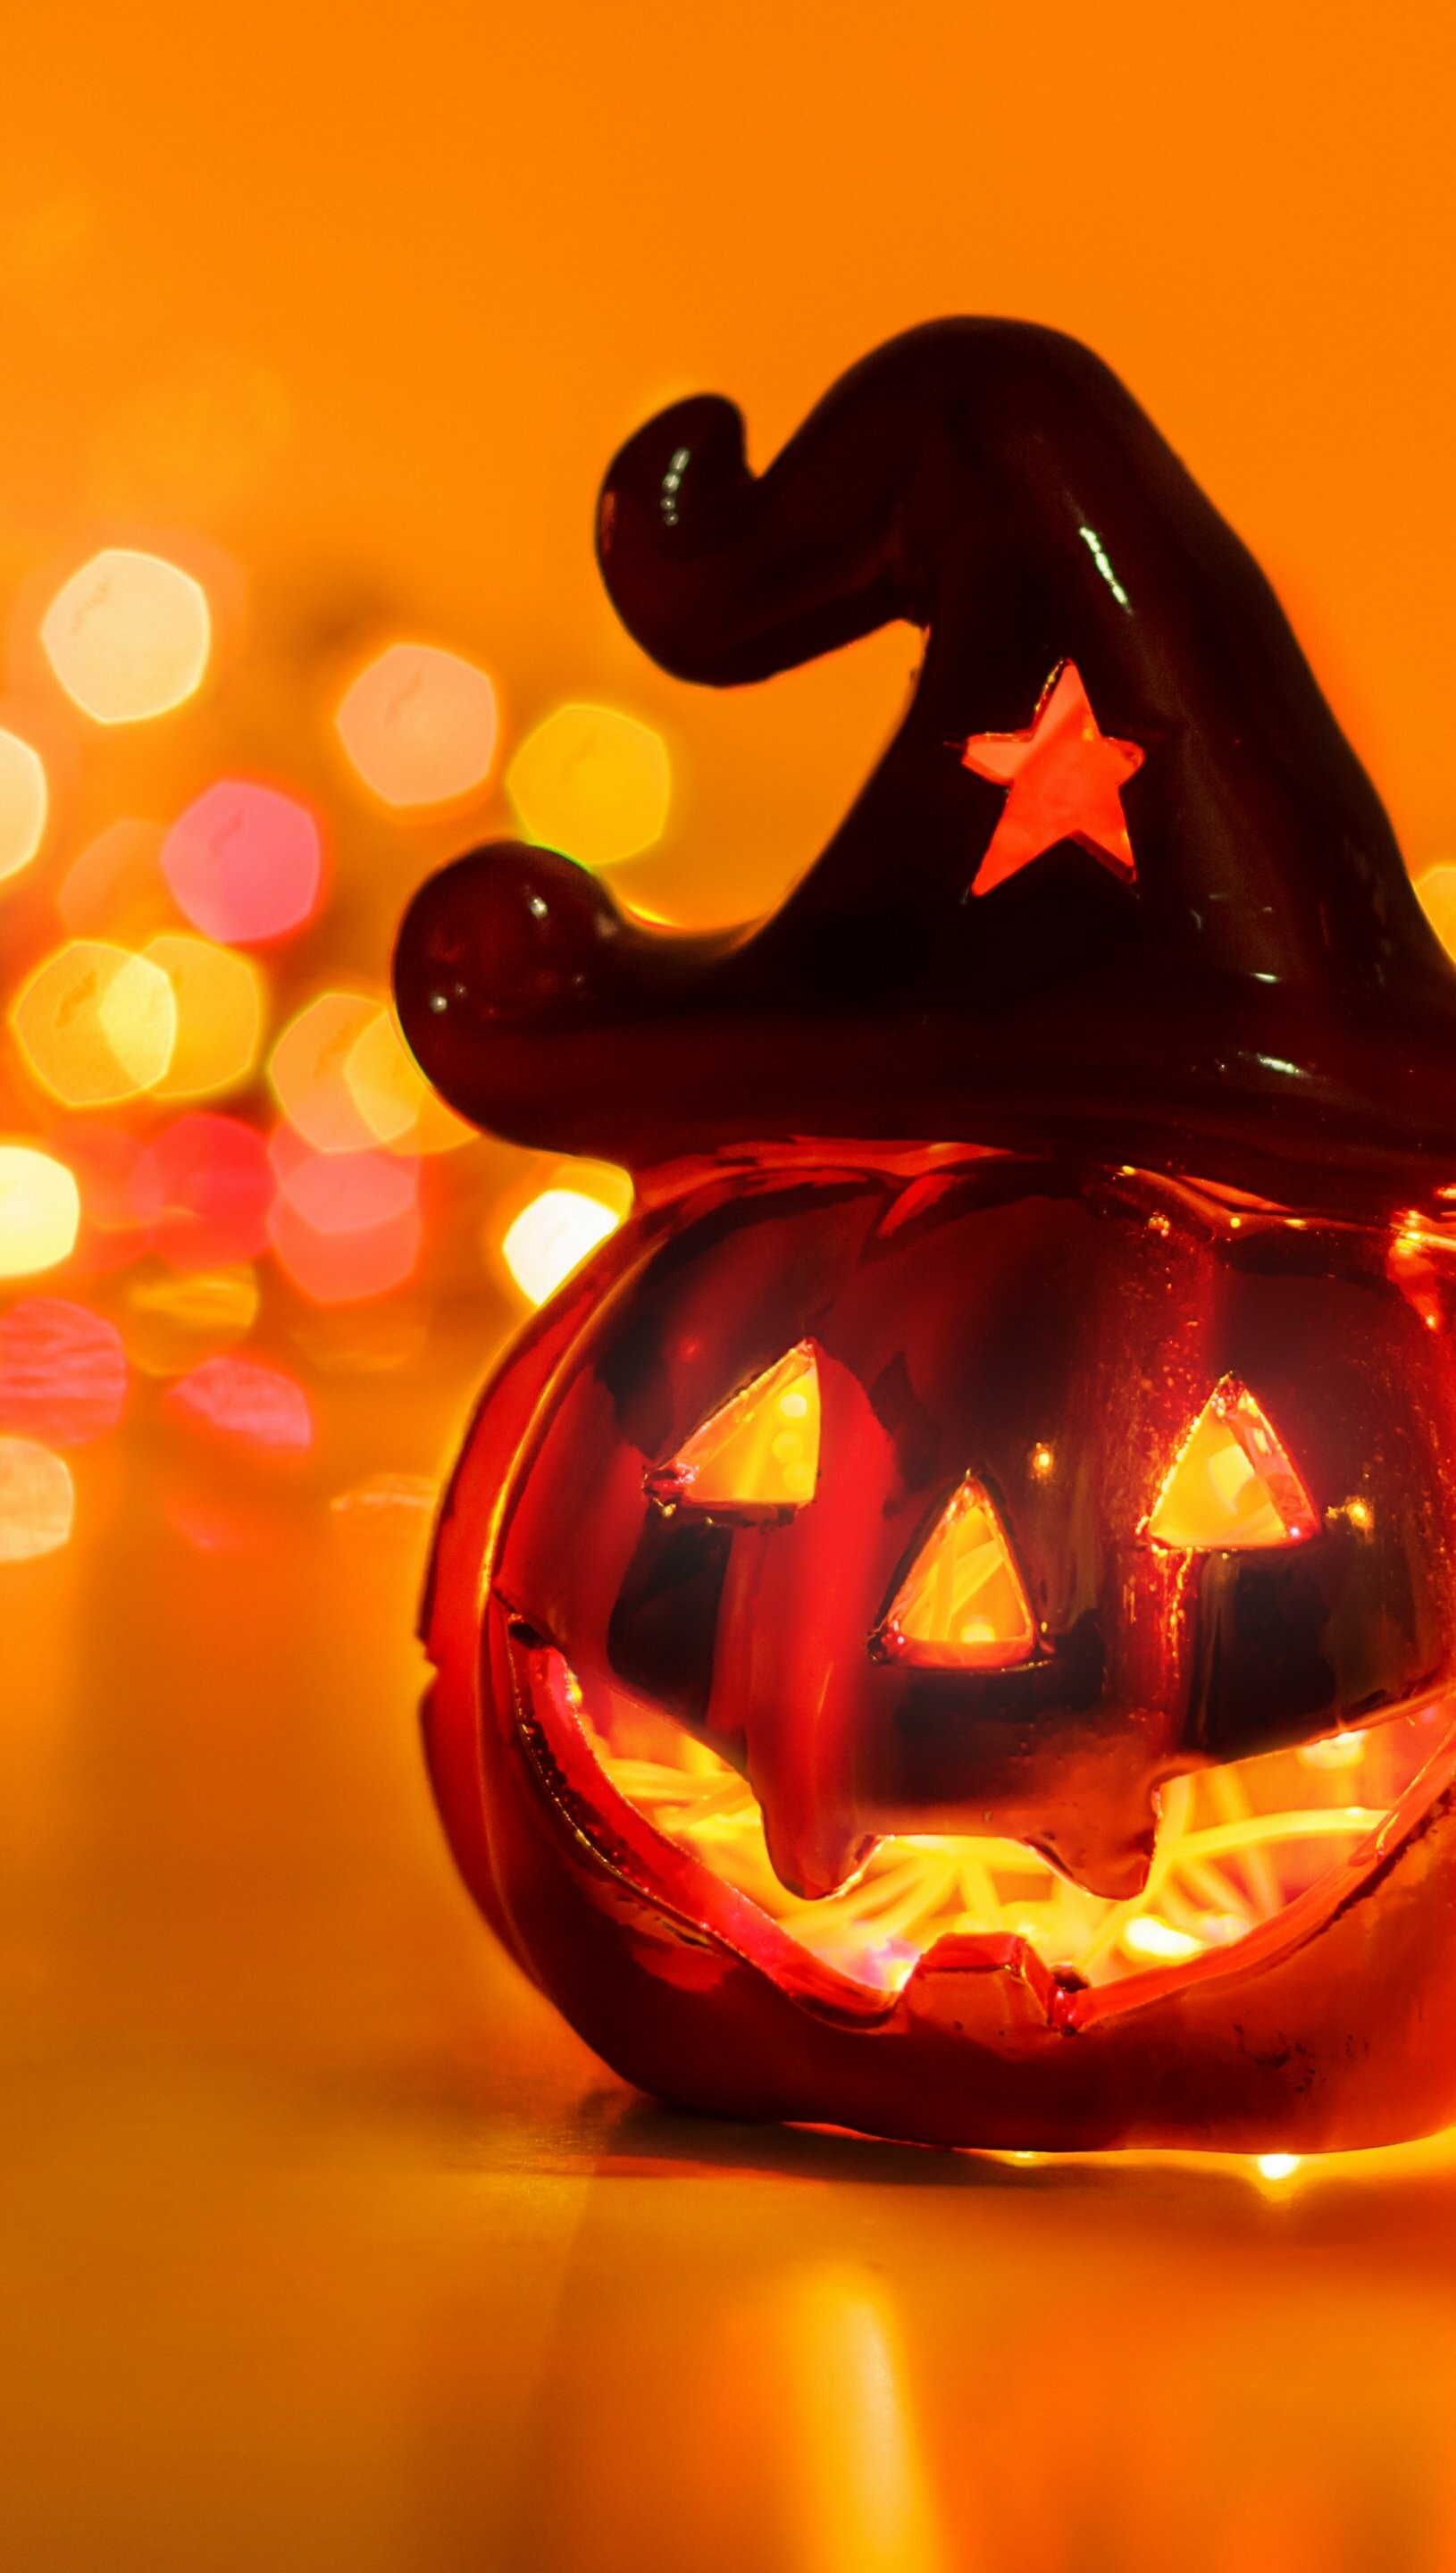 Halloween: Pumpkins with ghoulish faces and illuminated by candles, Witch. 1630x2880 HD Wallpaper.